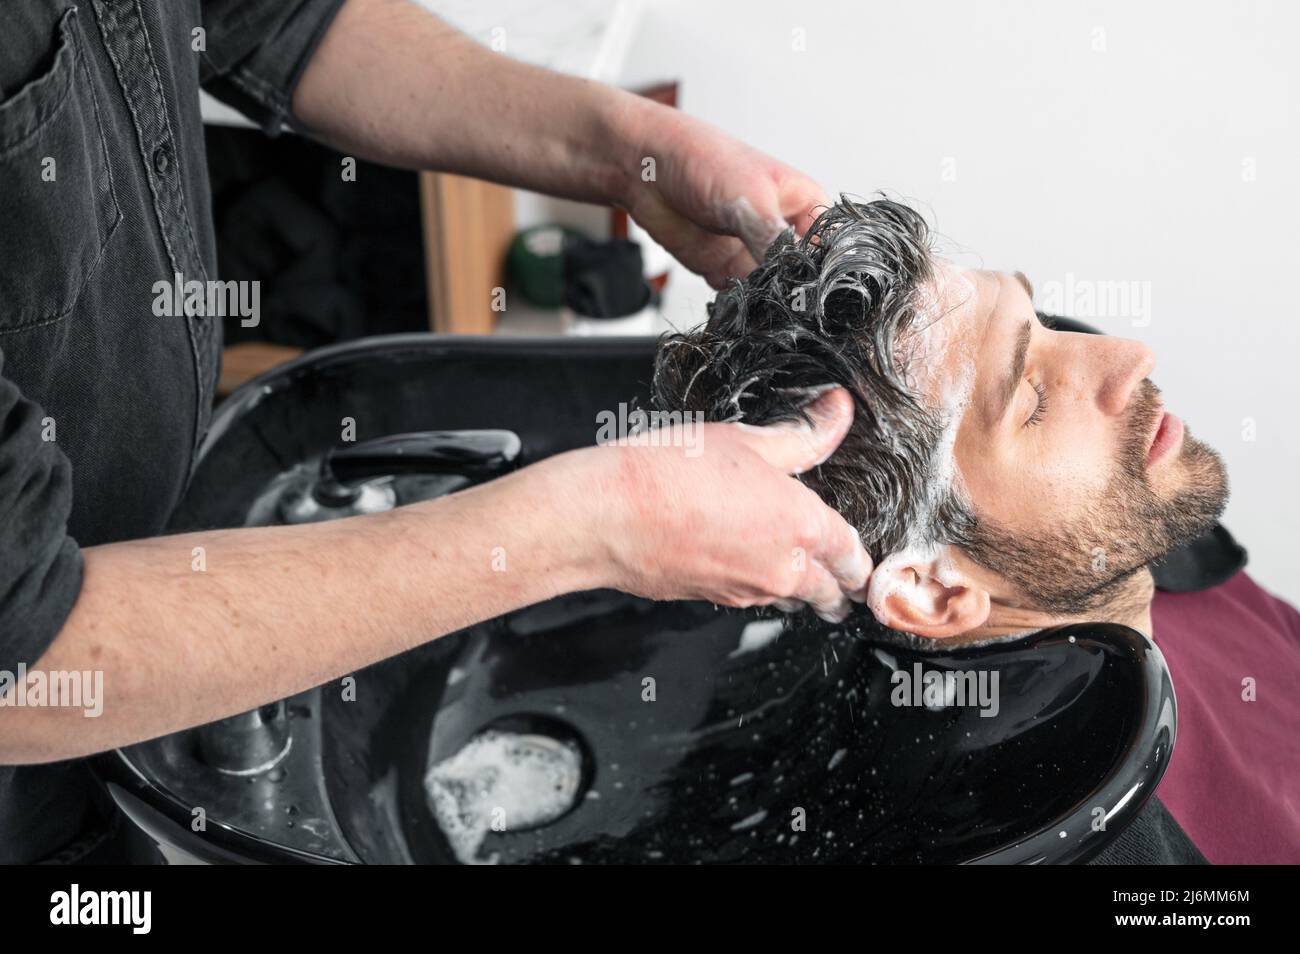 Barber shop. Hairdresser man washes client head in barbershop. High quality photography. Stock Photo